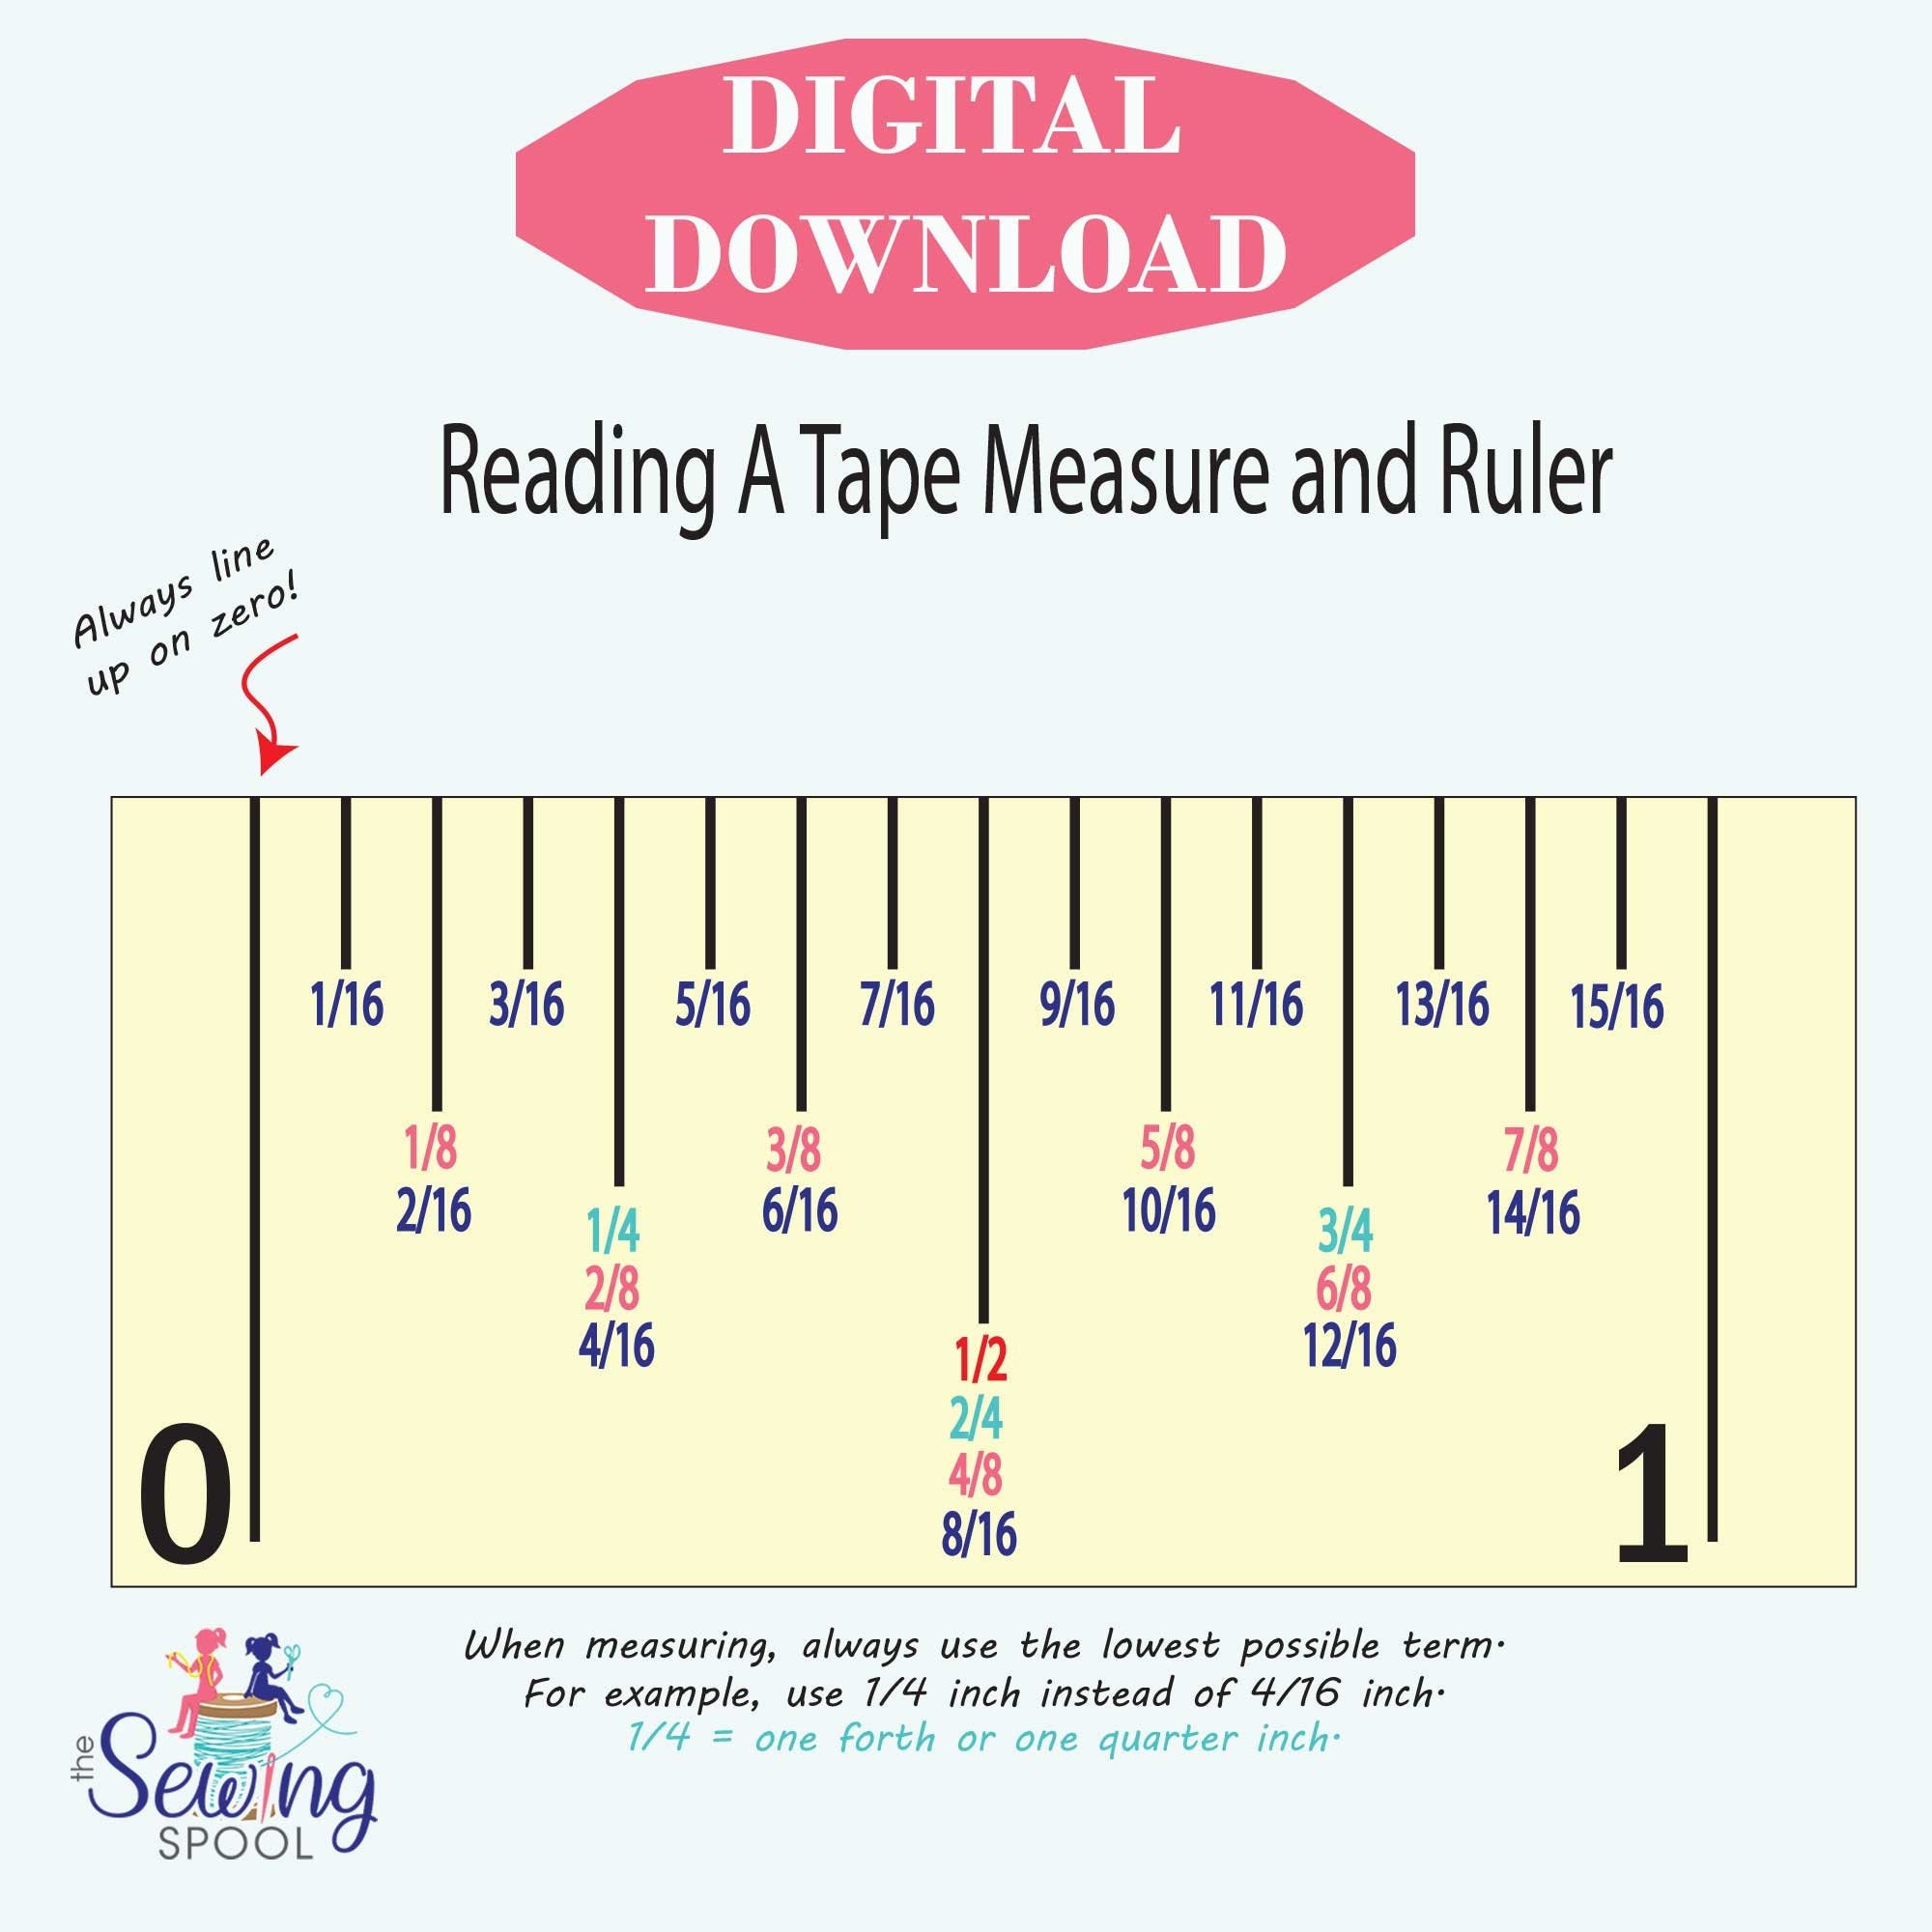 Printable Ruler Measurement Guideline With Decimals Metric Ruler Guide  Ruler Measurements Ruler Guideline Measurement Guideline 